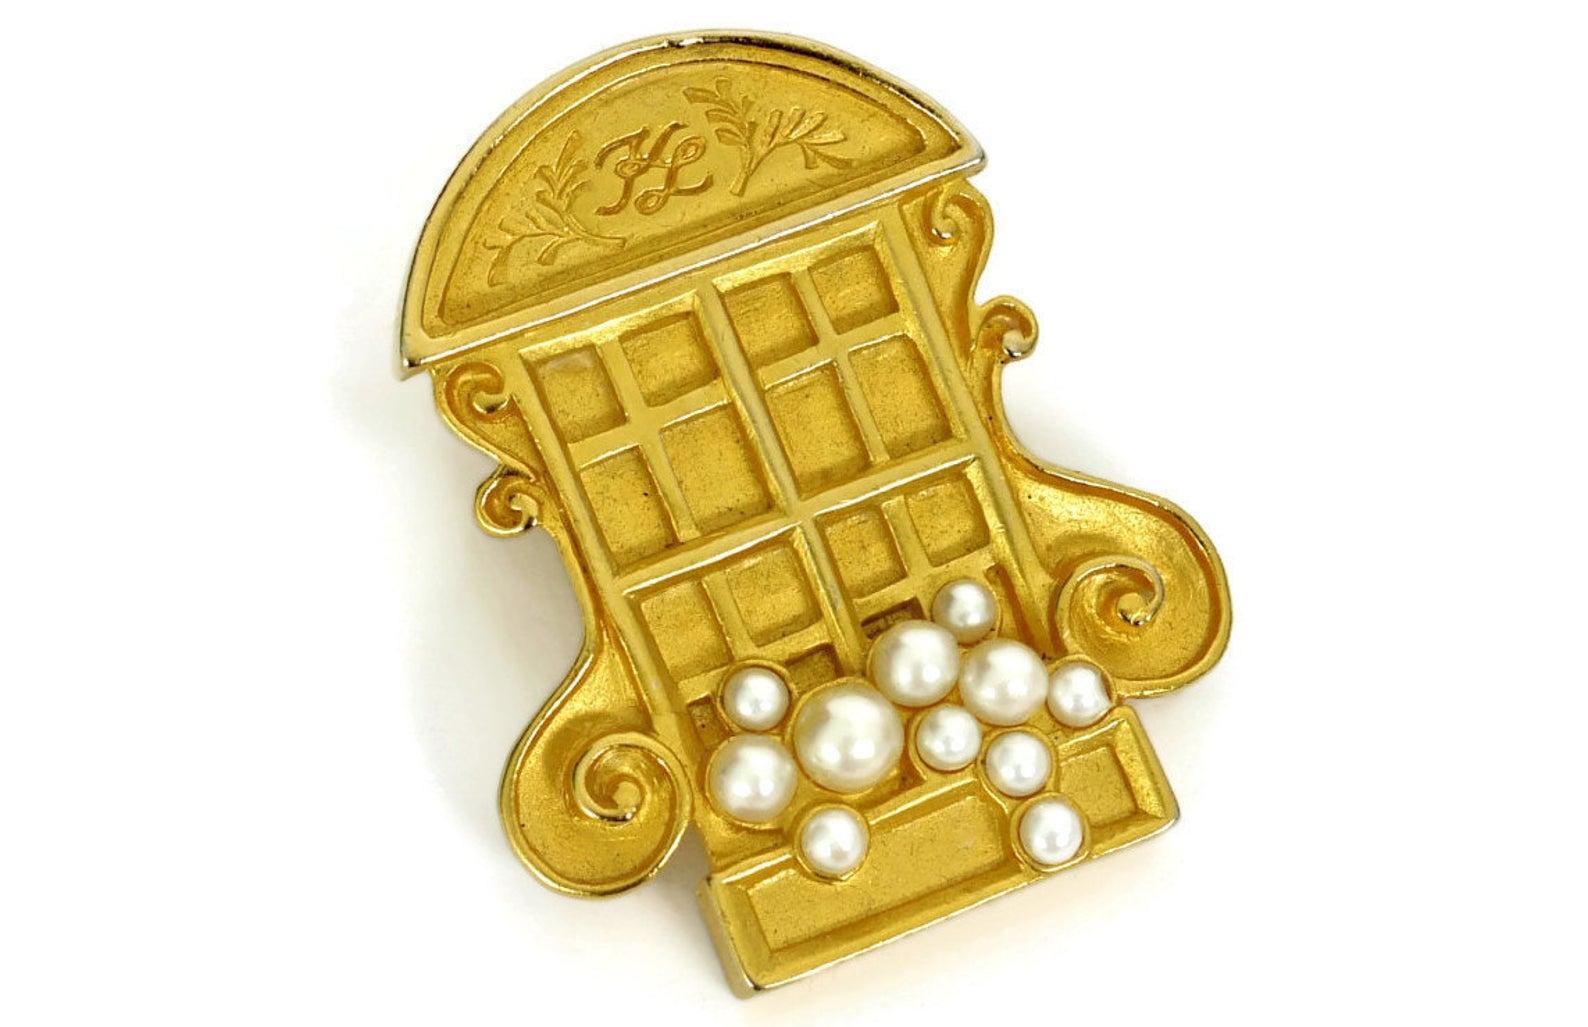 Vintage KARL LAGERFELD French Window Brooch

Measurements:
Height: 1 3/4 inches
Width: 1 3/8 inches


Features:
- 100% Authentic KARL LAGERFELD.
- Detailed French window embellished with Faux Pearls.
- Matte gold hardware.
- KL inscription on the